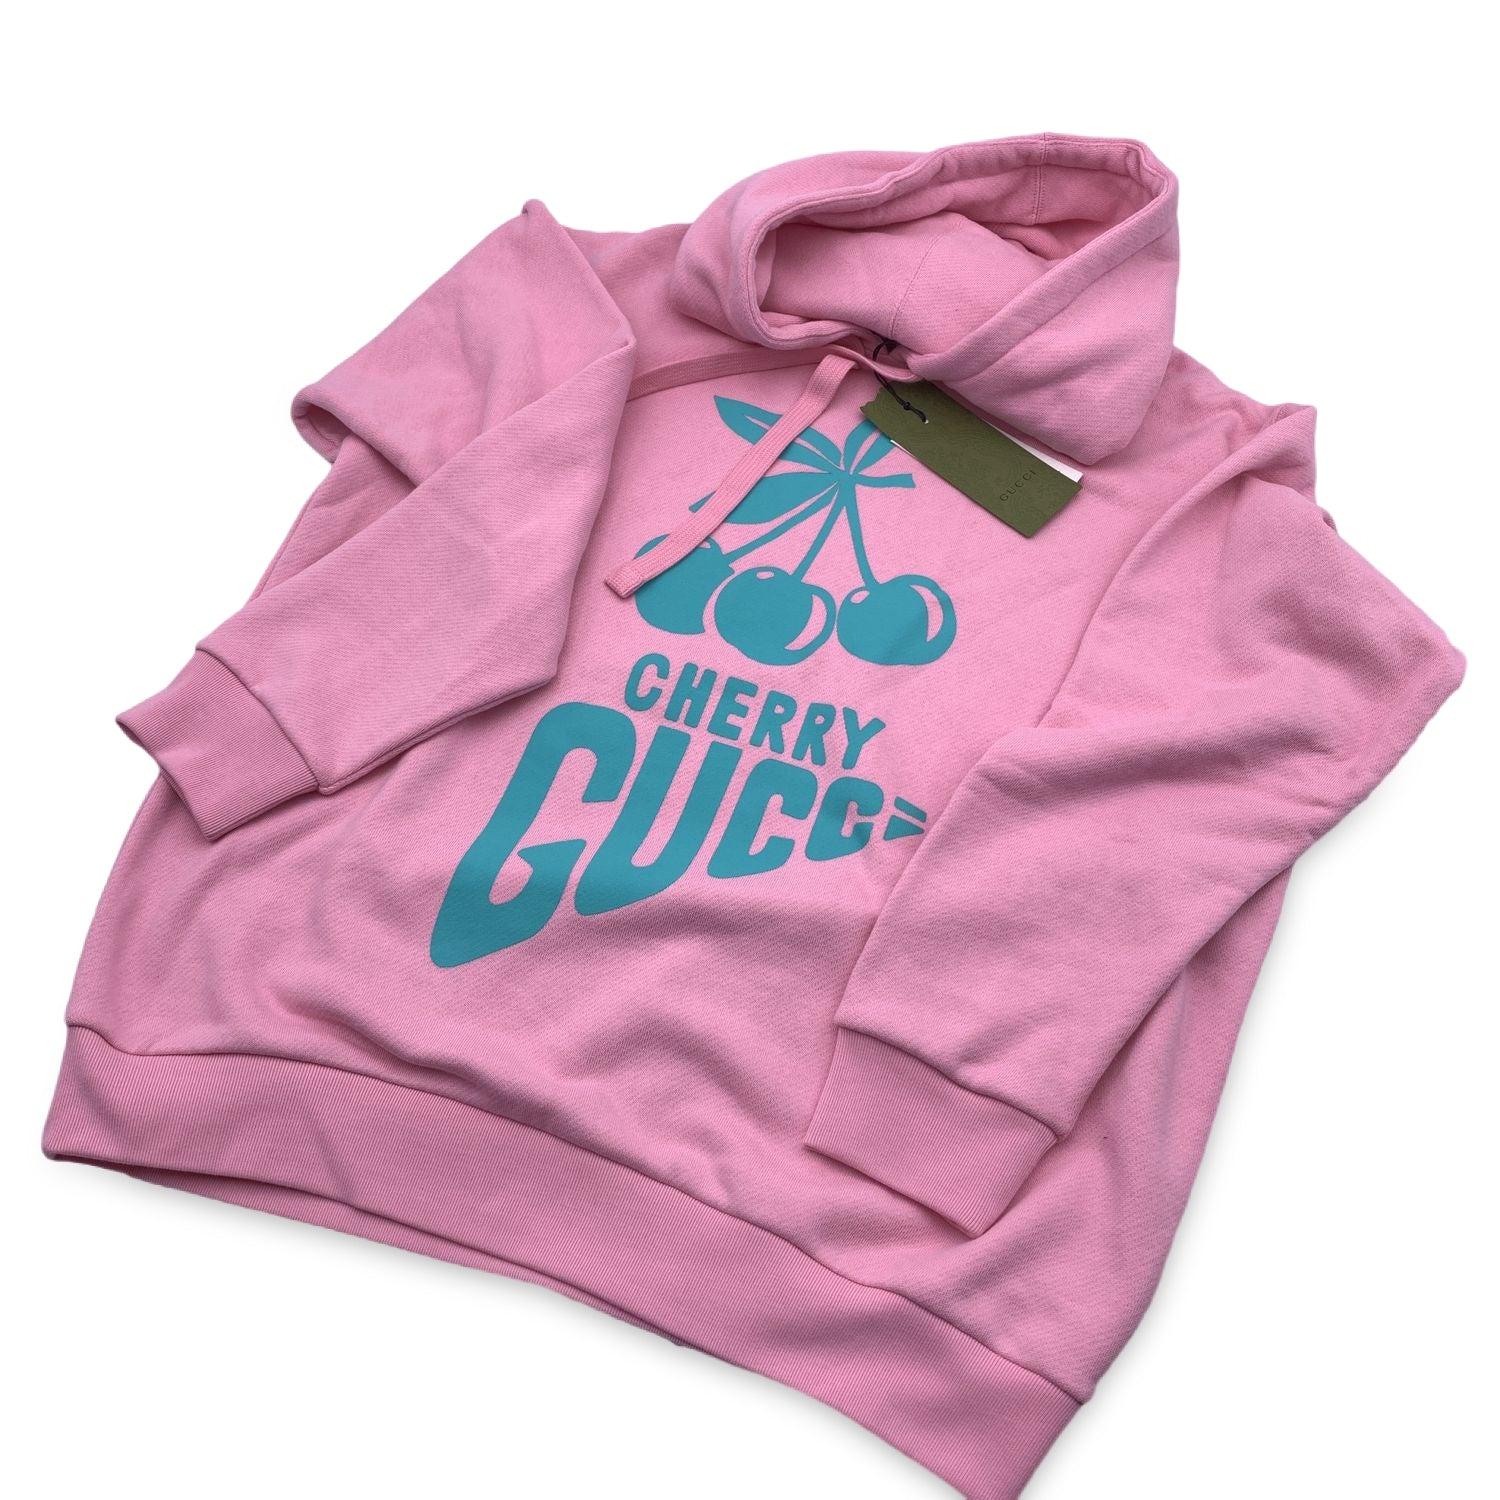 Gucci light pink heavy fleece cotton jersey sweatshirt with 'Cherry Gucci' print . Hooded. Adjustable drawstring at neckline. Oversized cut. Made of 100% cotton. Size: M (The size shown for this item is the size indicated by the designer on the